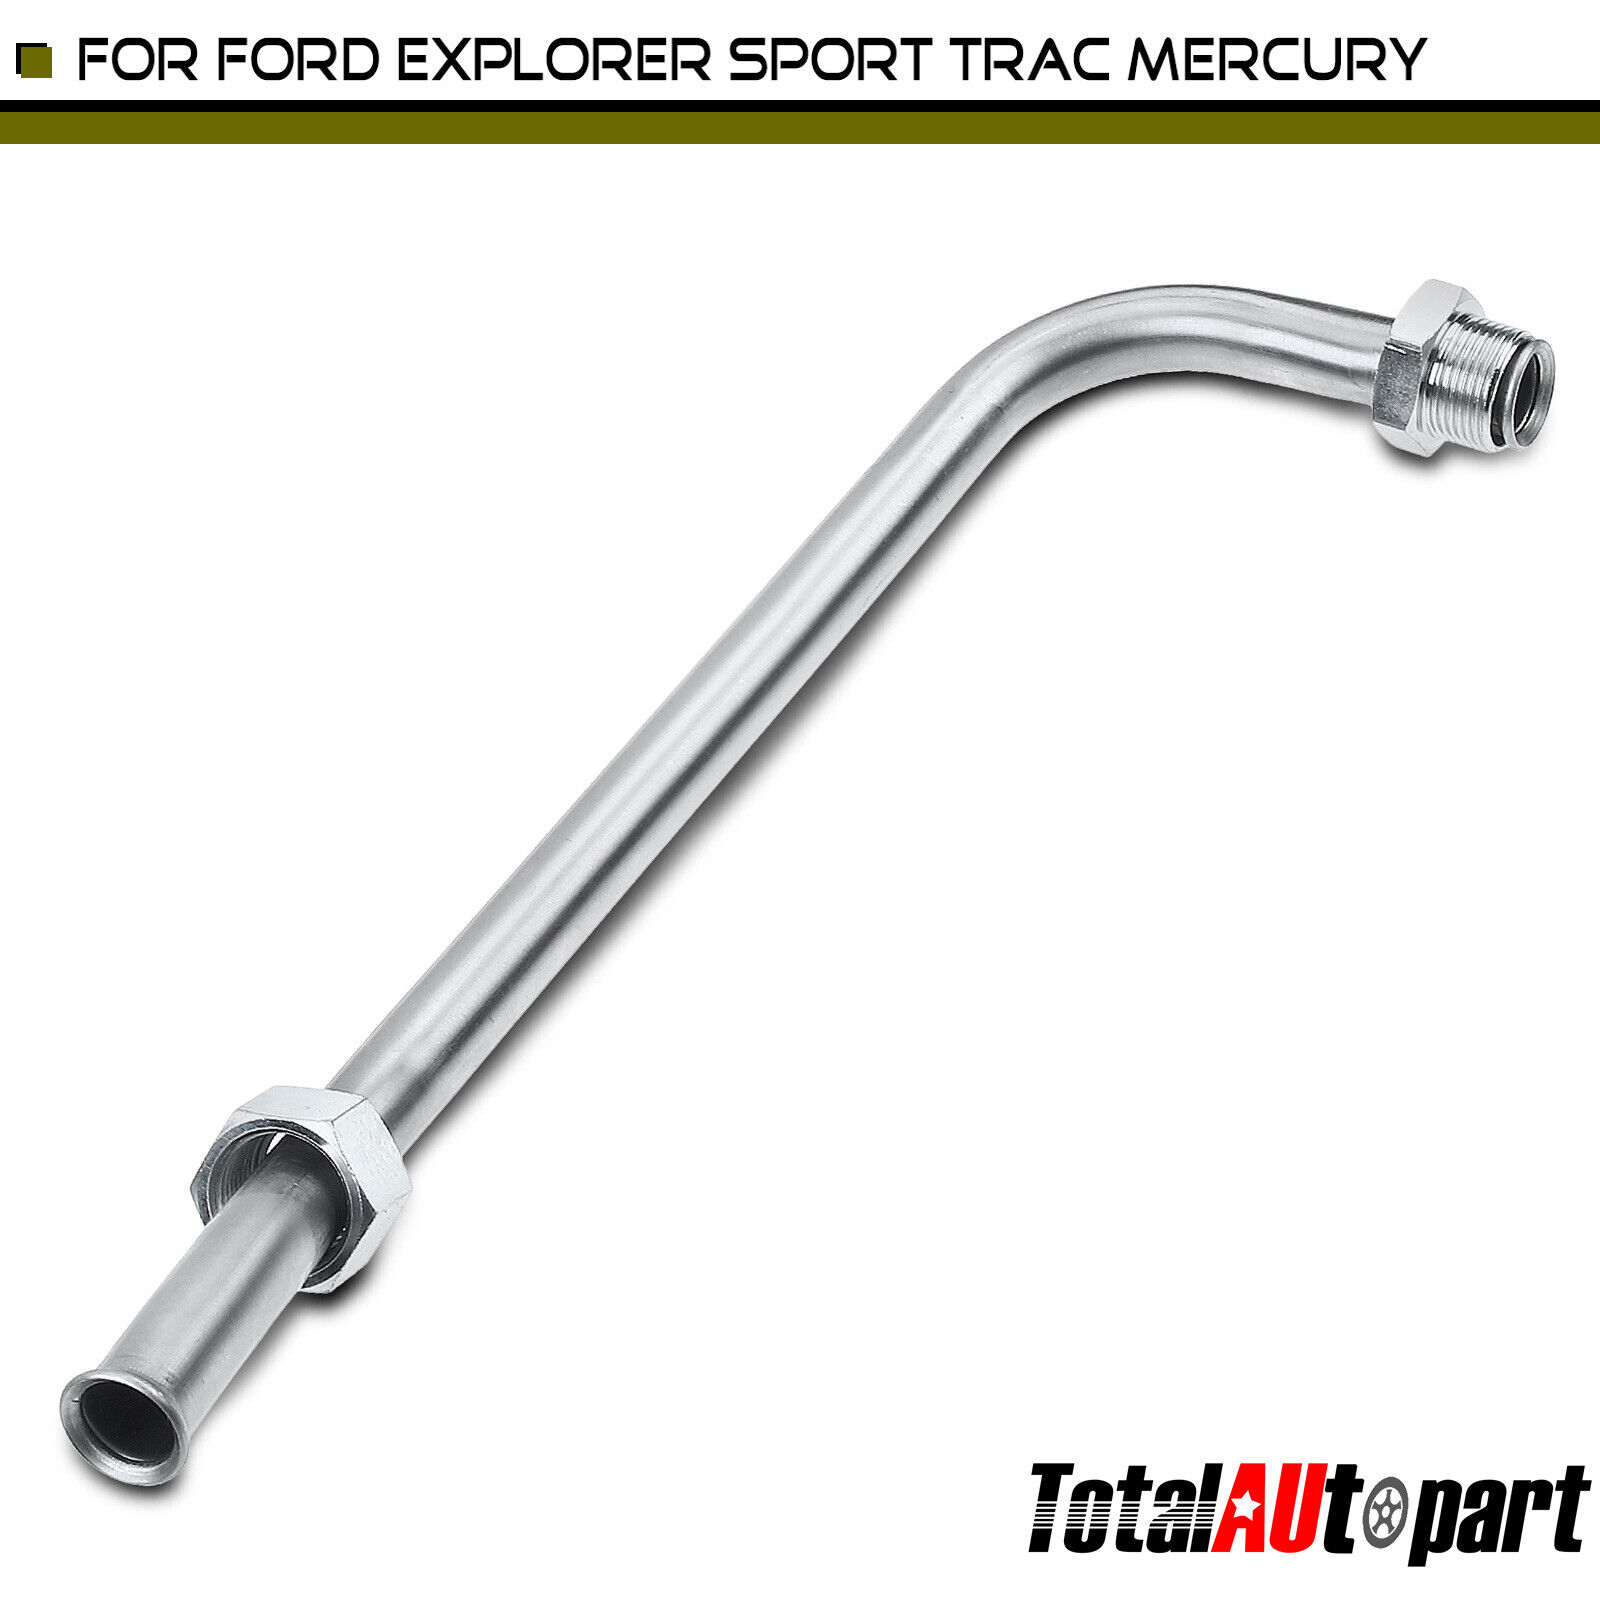 Exhaust Gas Recirculation Tube for Ford Explorer 2004-2010 Mercury Mountaineer